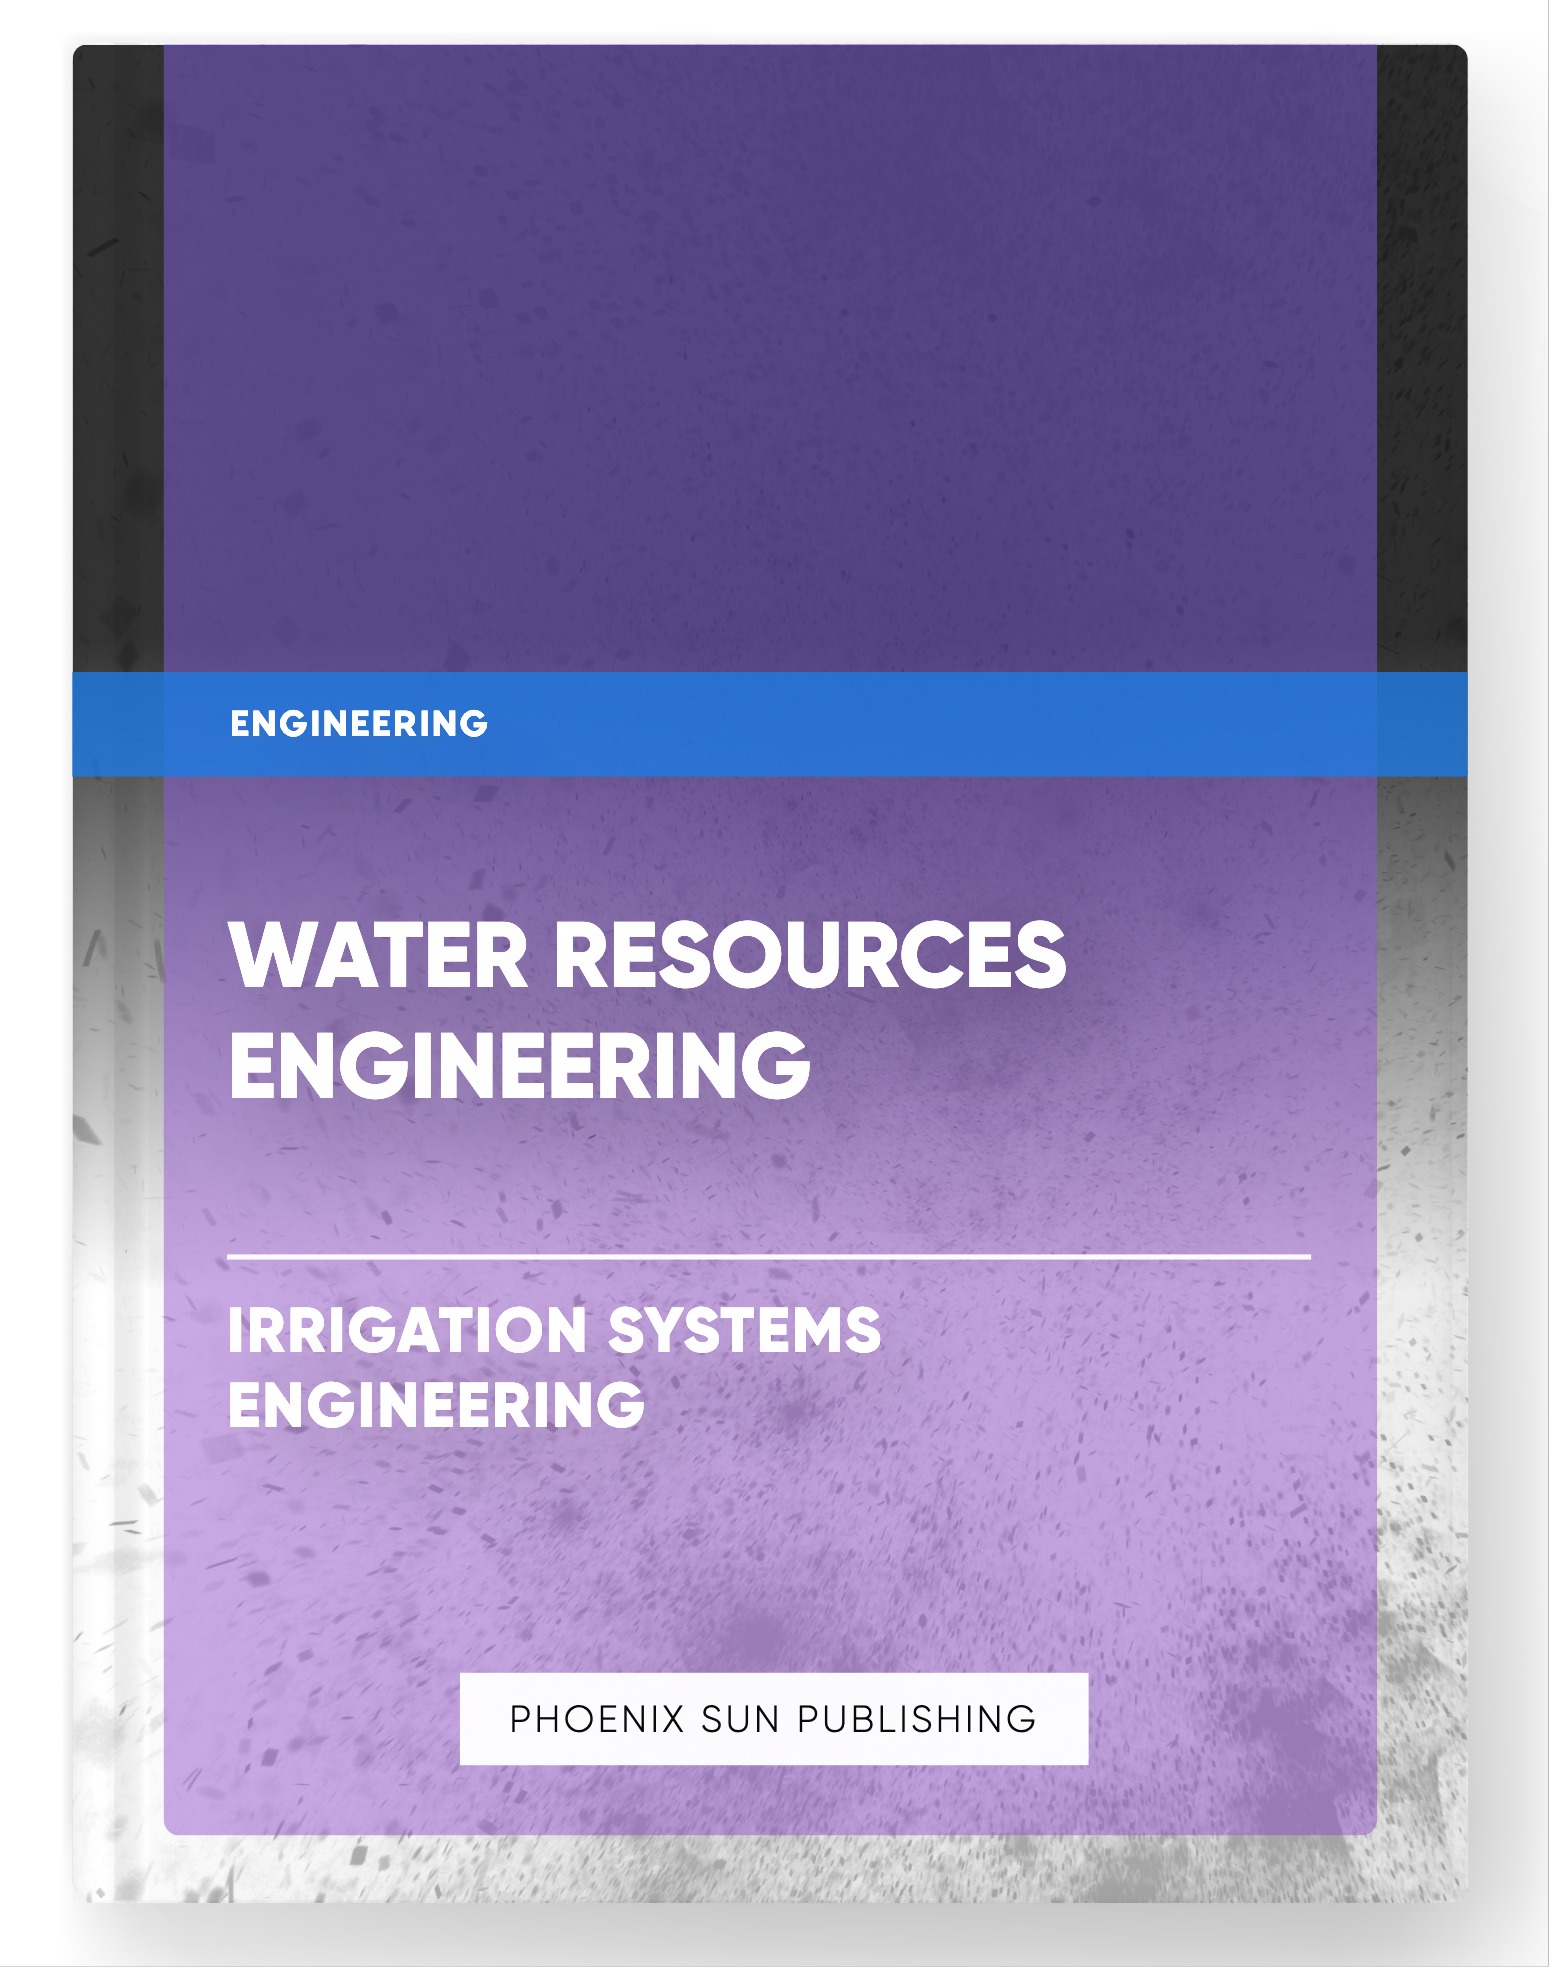 Water Resources Engineering – Irrigation Systems Engineering